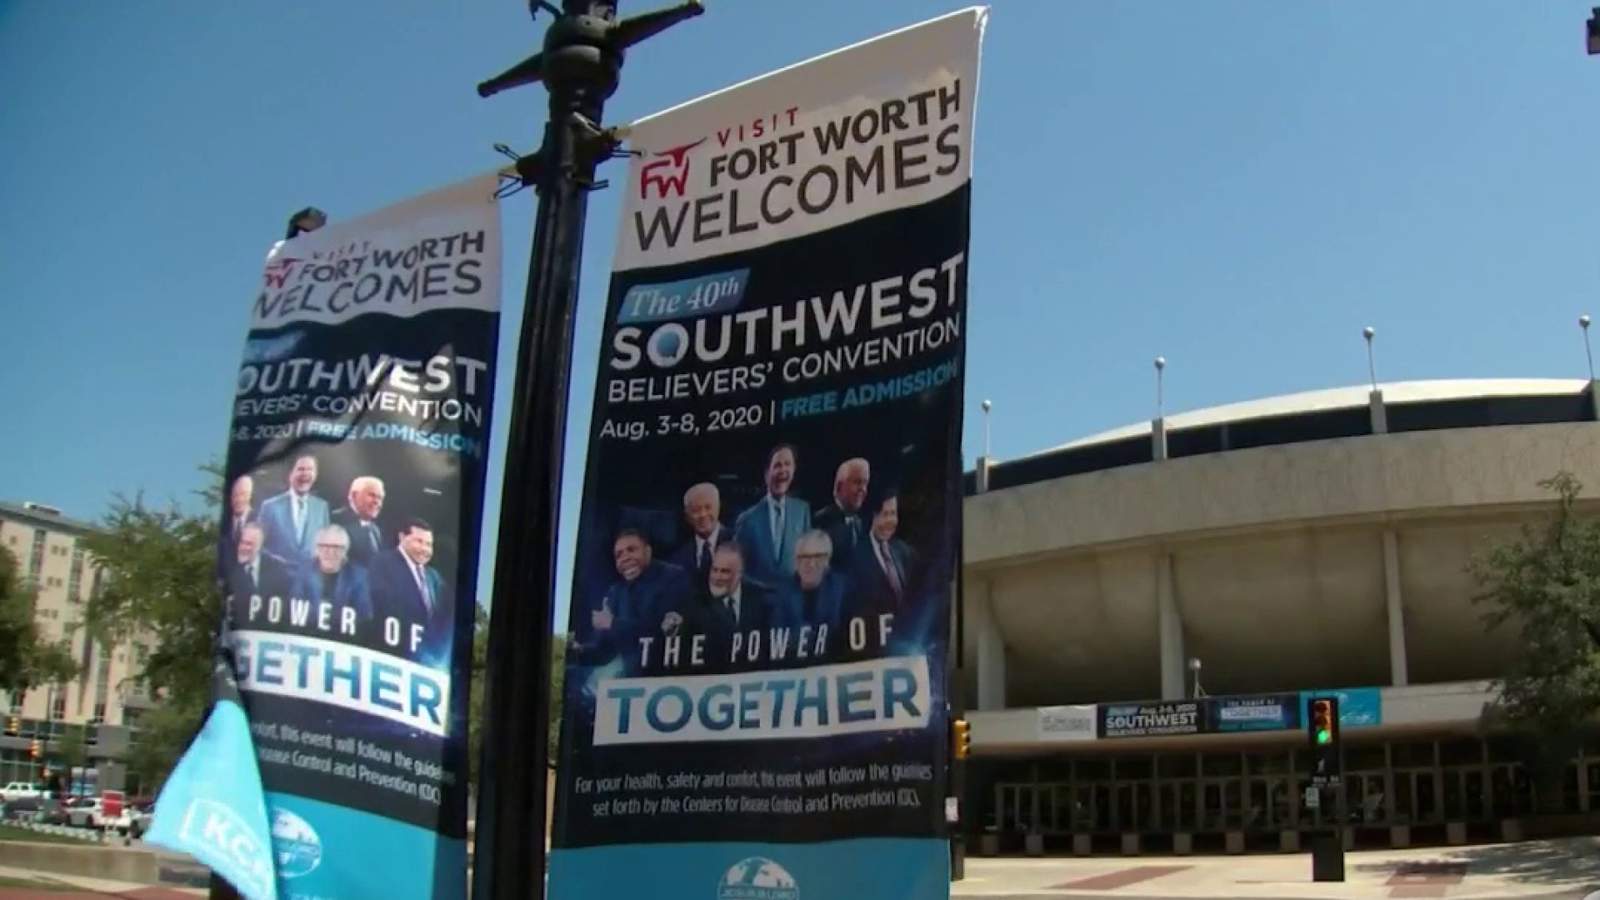 Tarrant County Judge disappointed as Southwest Believers Convention draws large, unmasked crowds